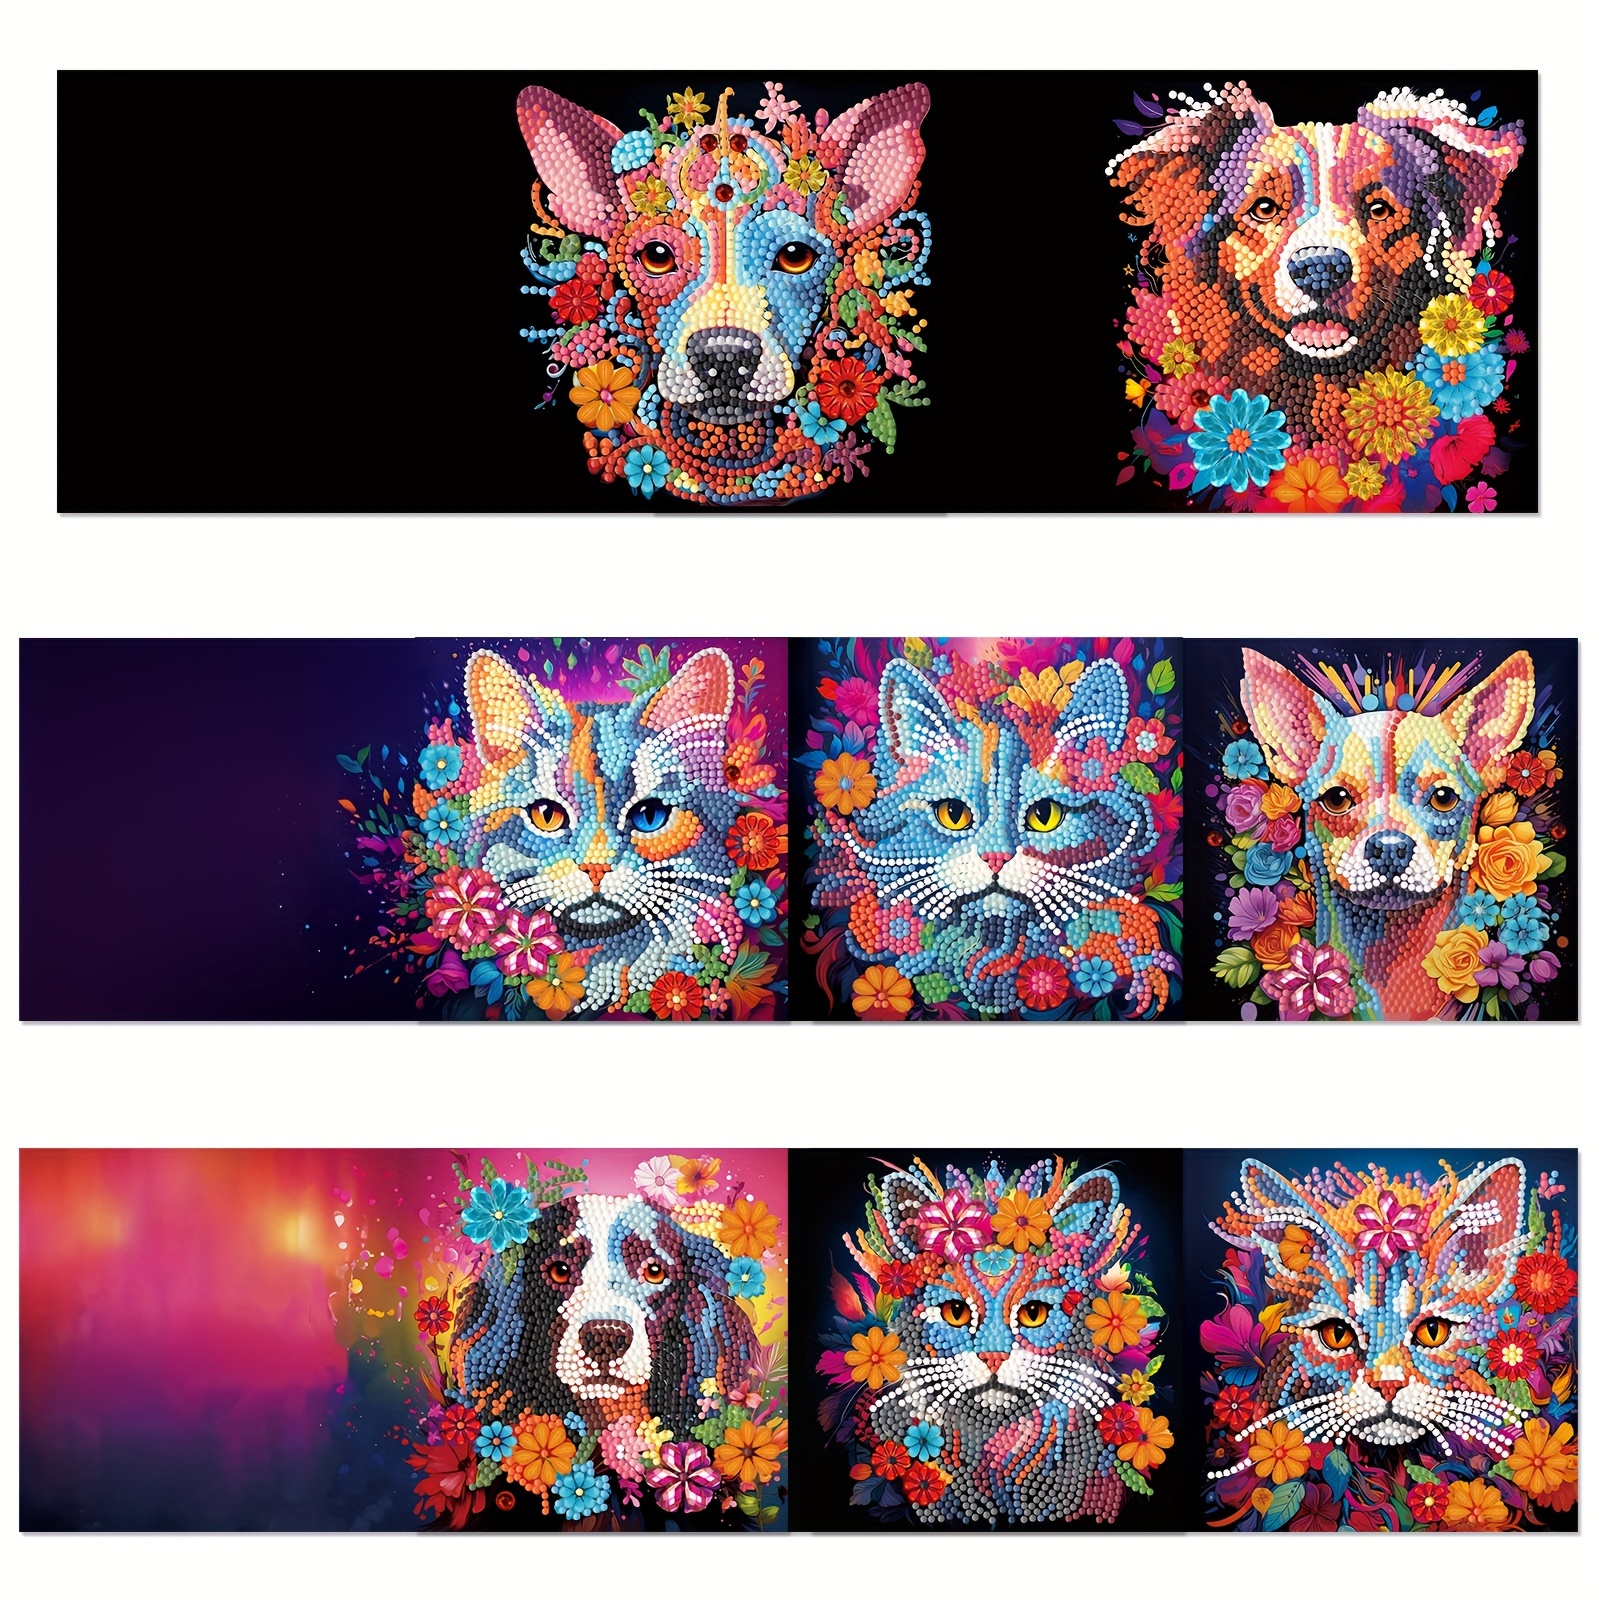 

8pcs, Diy Animal Diamond Art Painting Greeting Card, Cat And Dog Patterns Diamond Art Cards For Beginner Cards Gift For Family Friends, Small Business Supplies, Thank You Cards